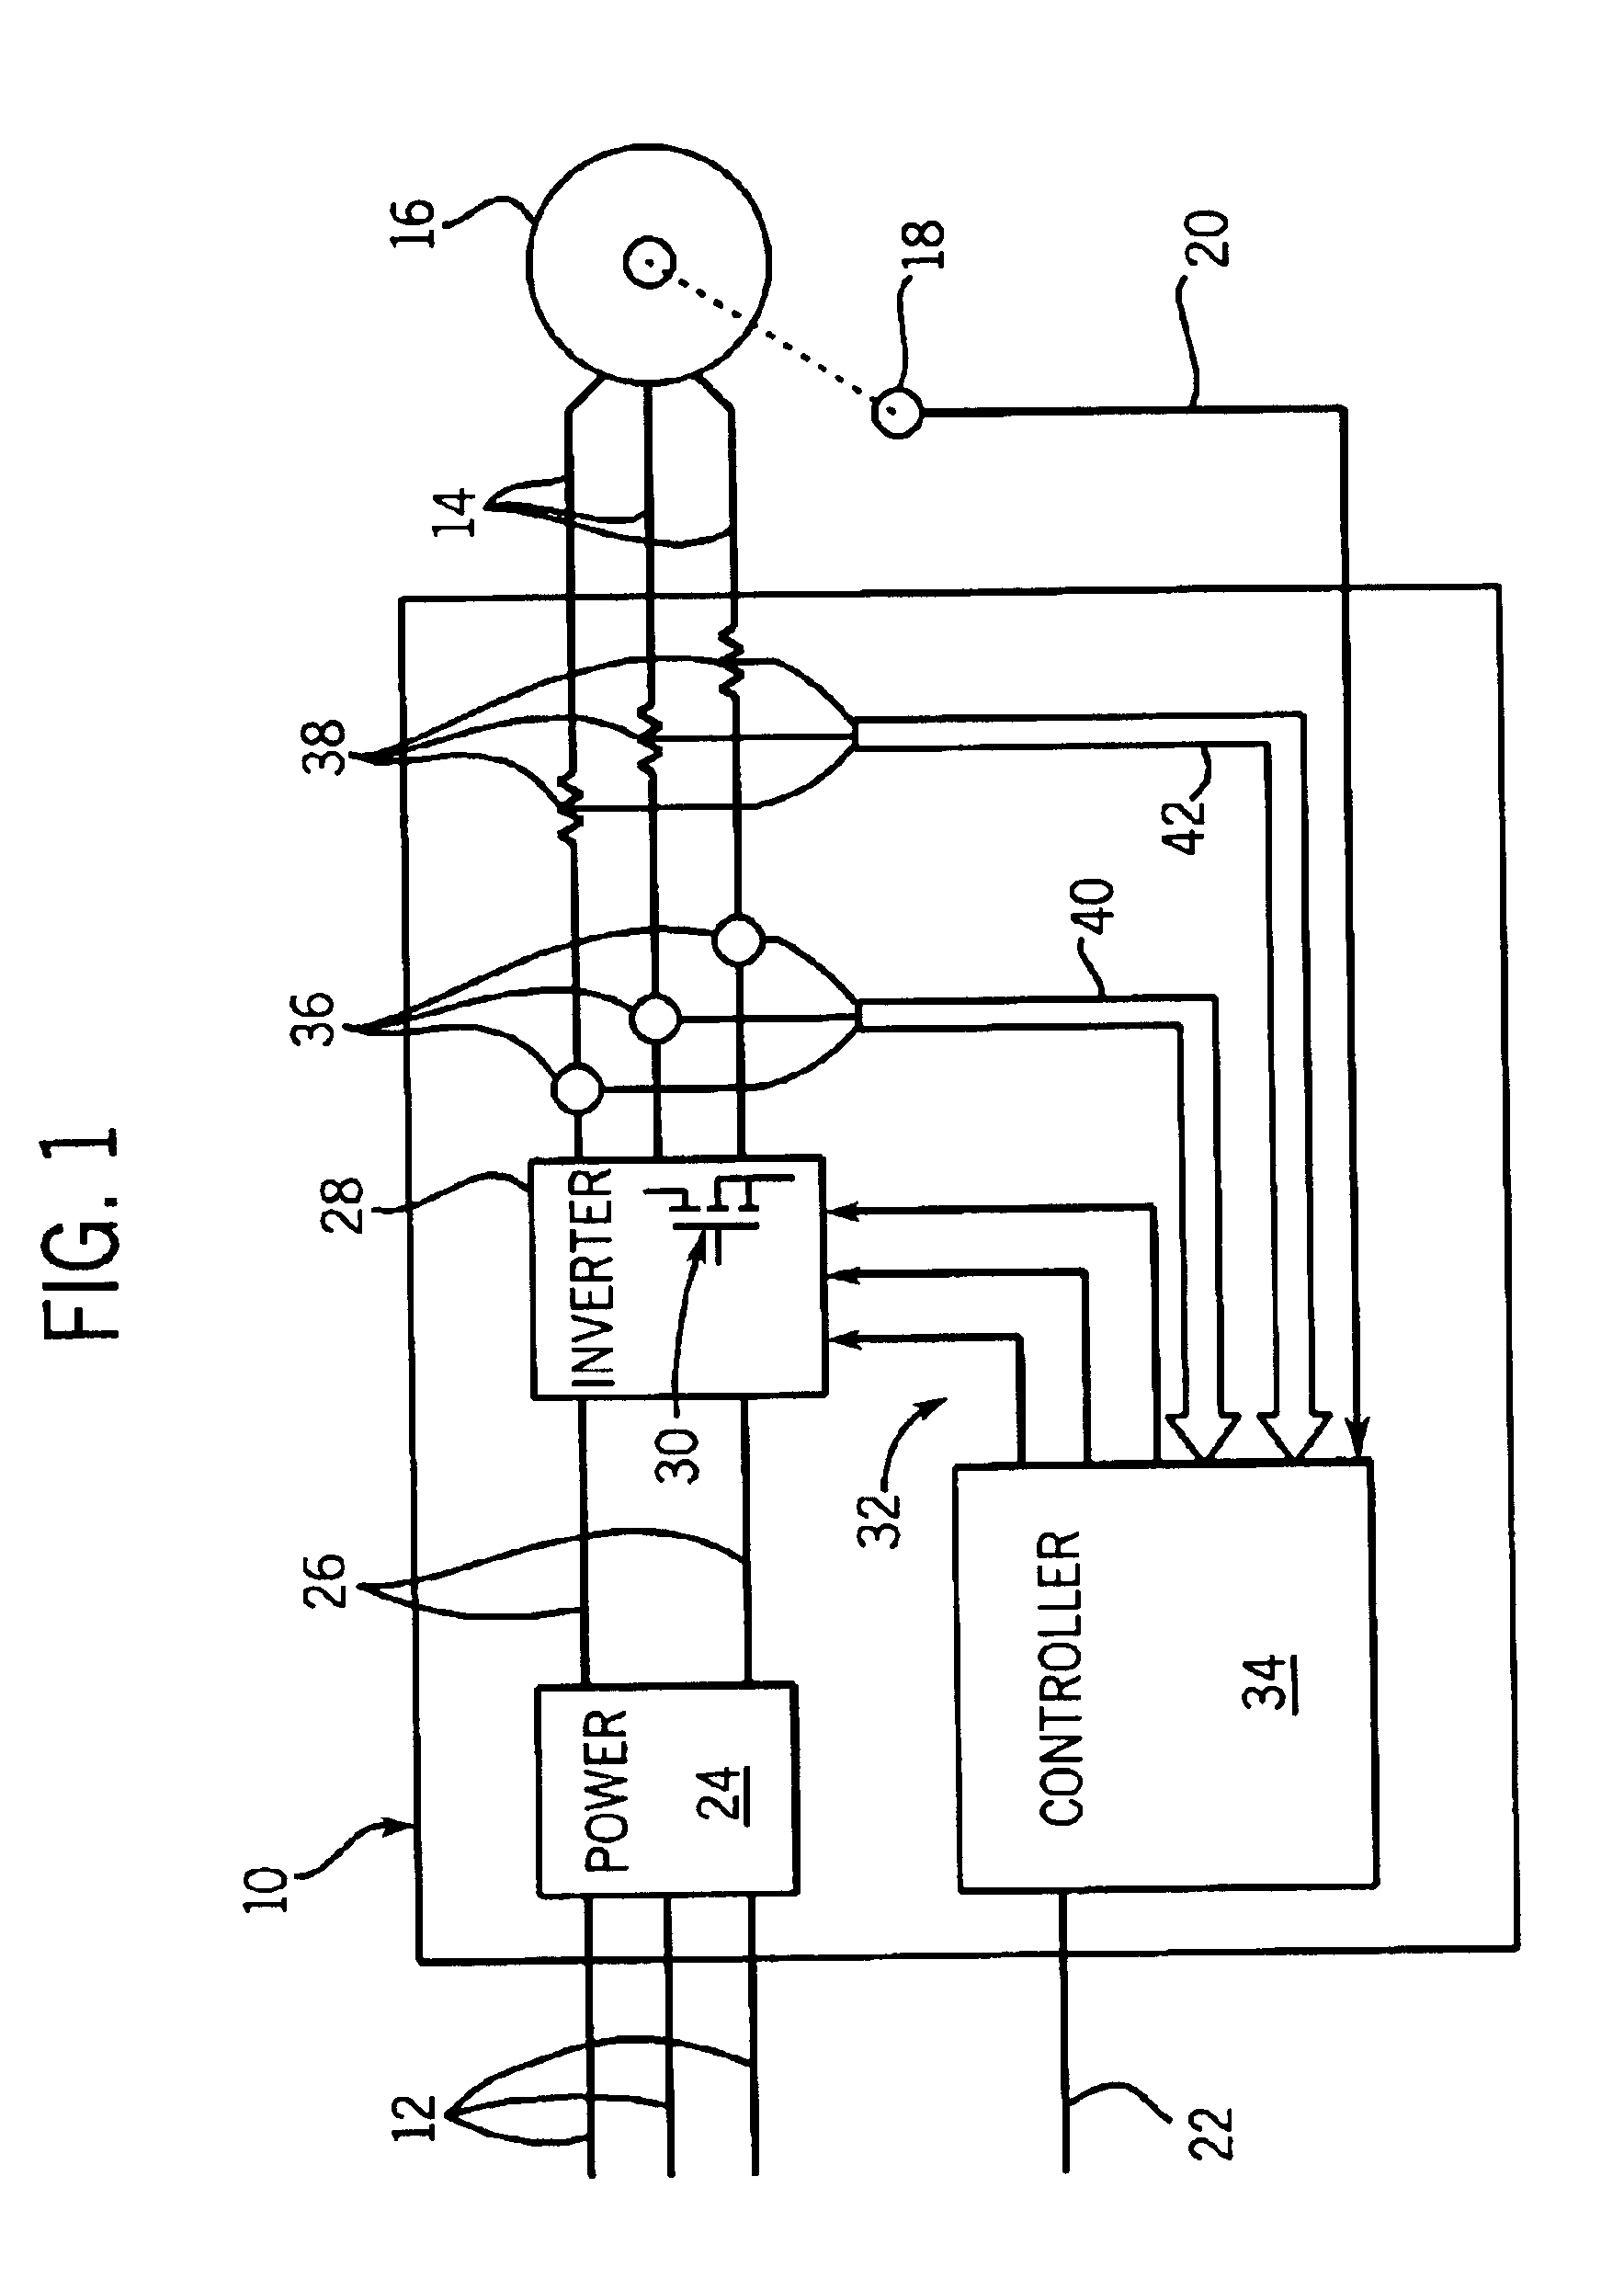 Motor drive with voltage-accurate inverter